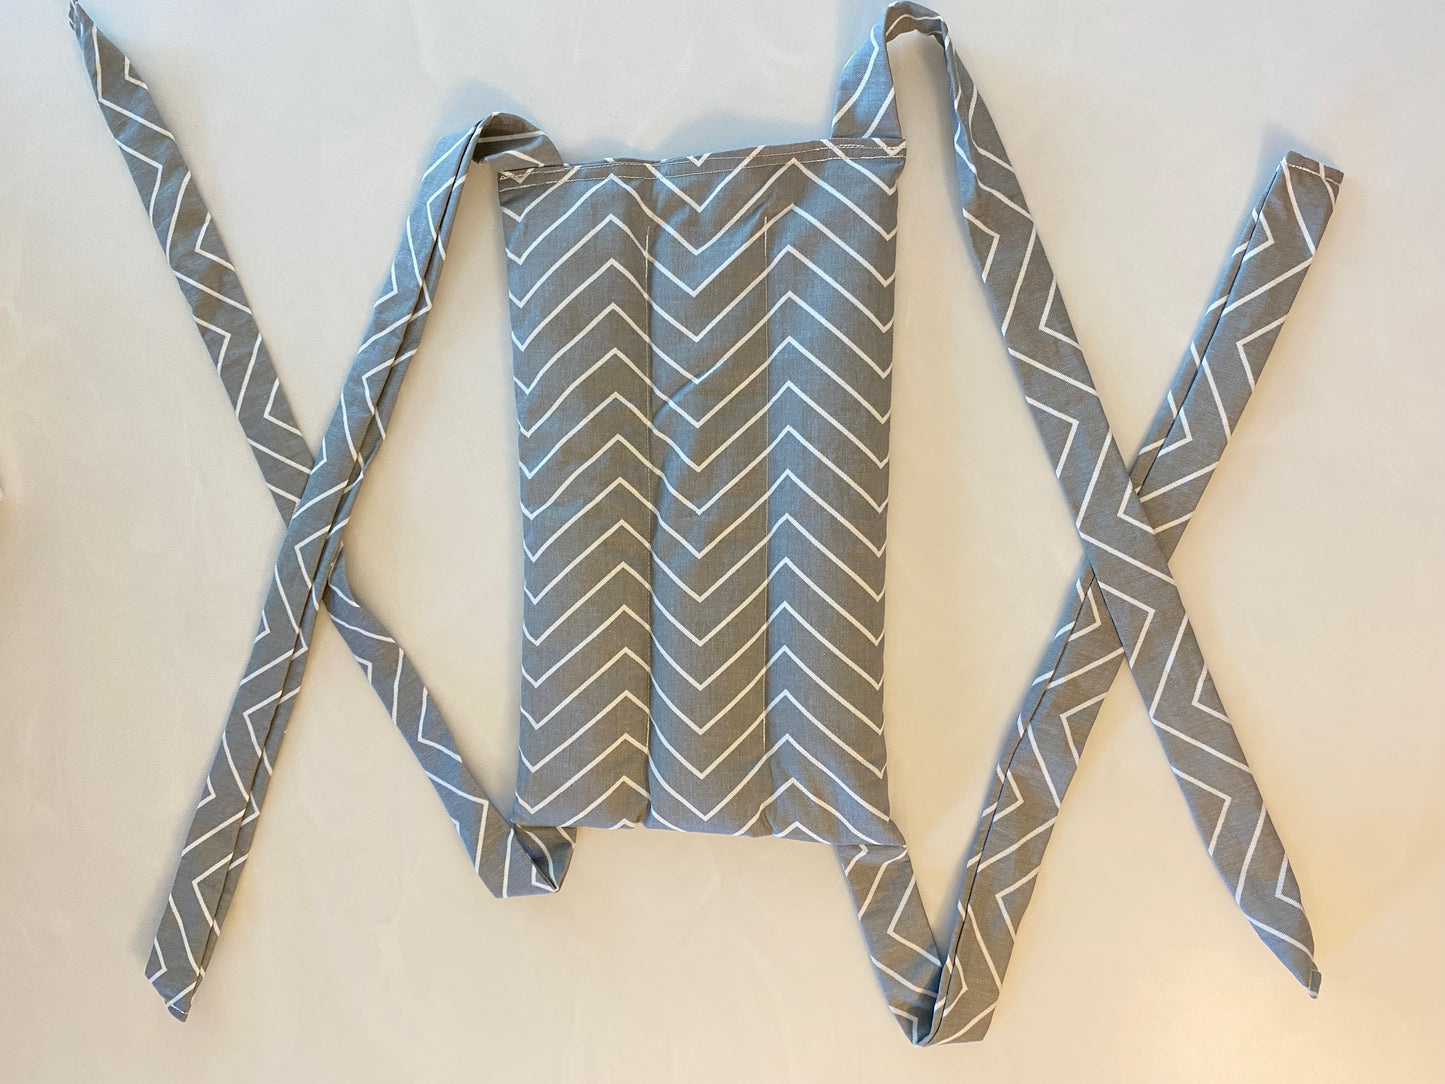 Grey/White Chevron Stripe Large Microwavable Rice Bag with Ties for Hands Free Use